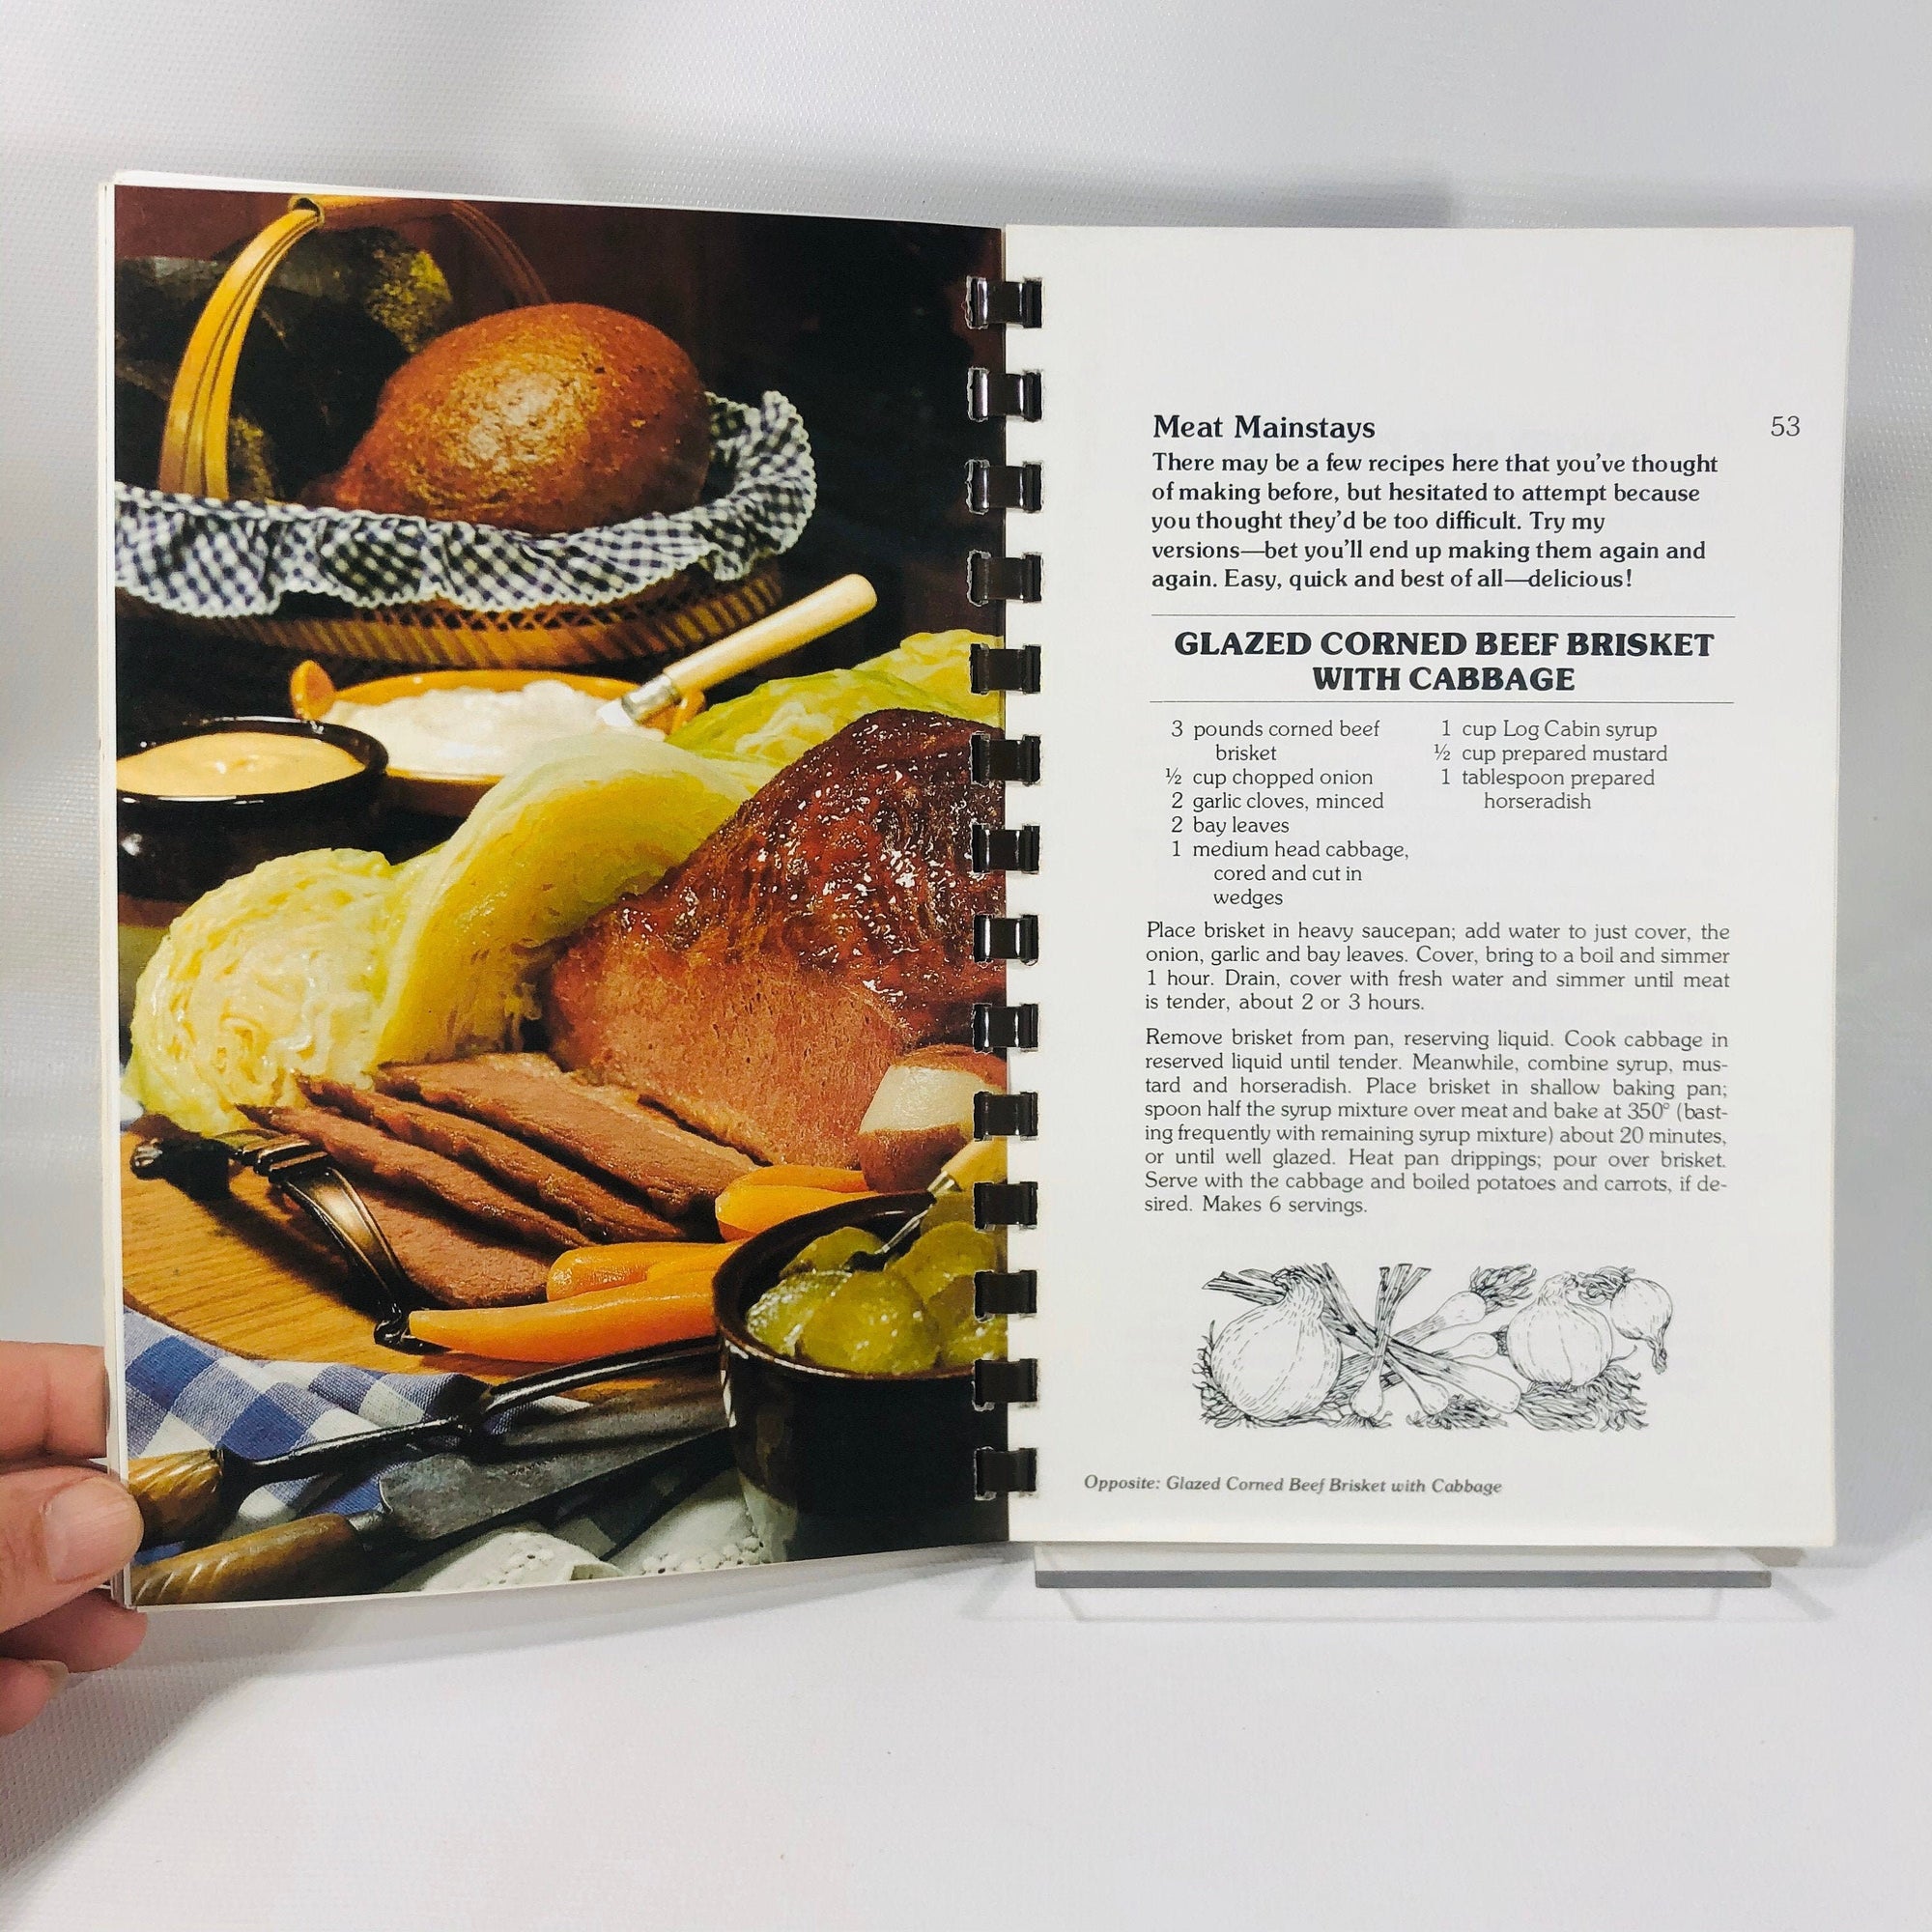 Cora's Country Cookbook Published by General Foods in 1977 Vintage Cookbook